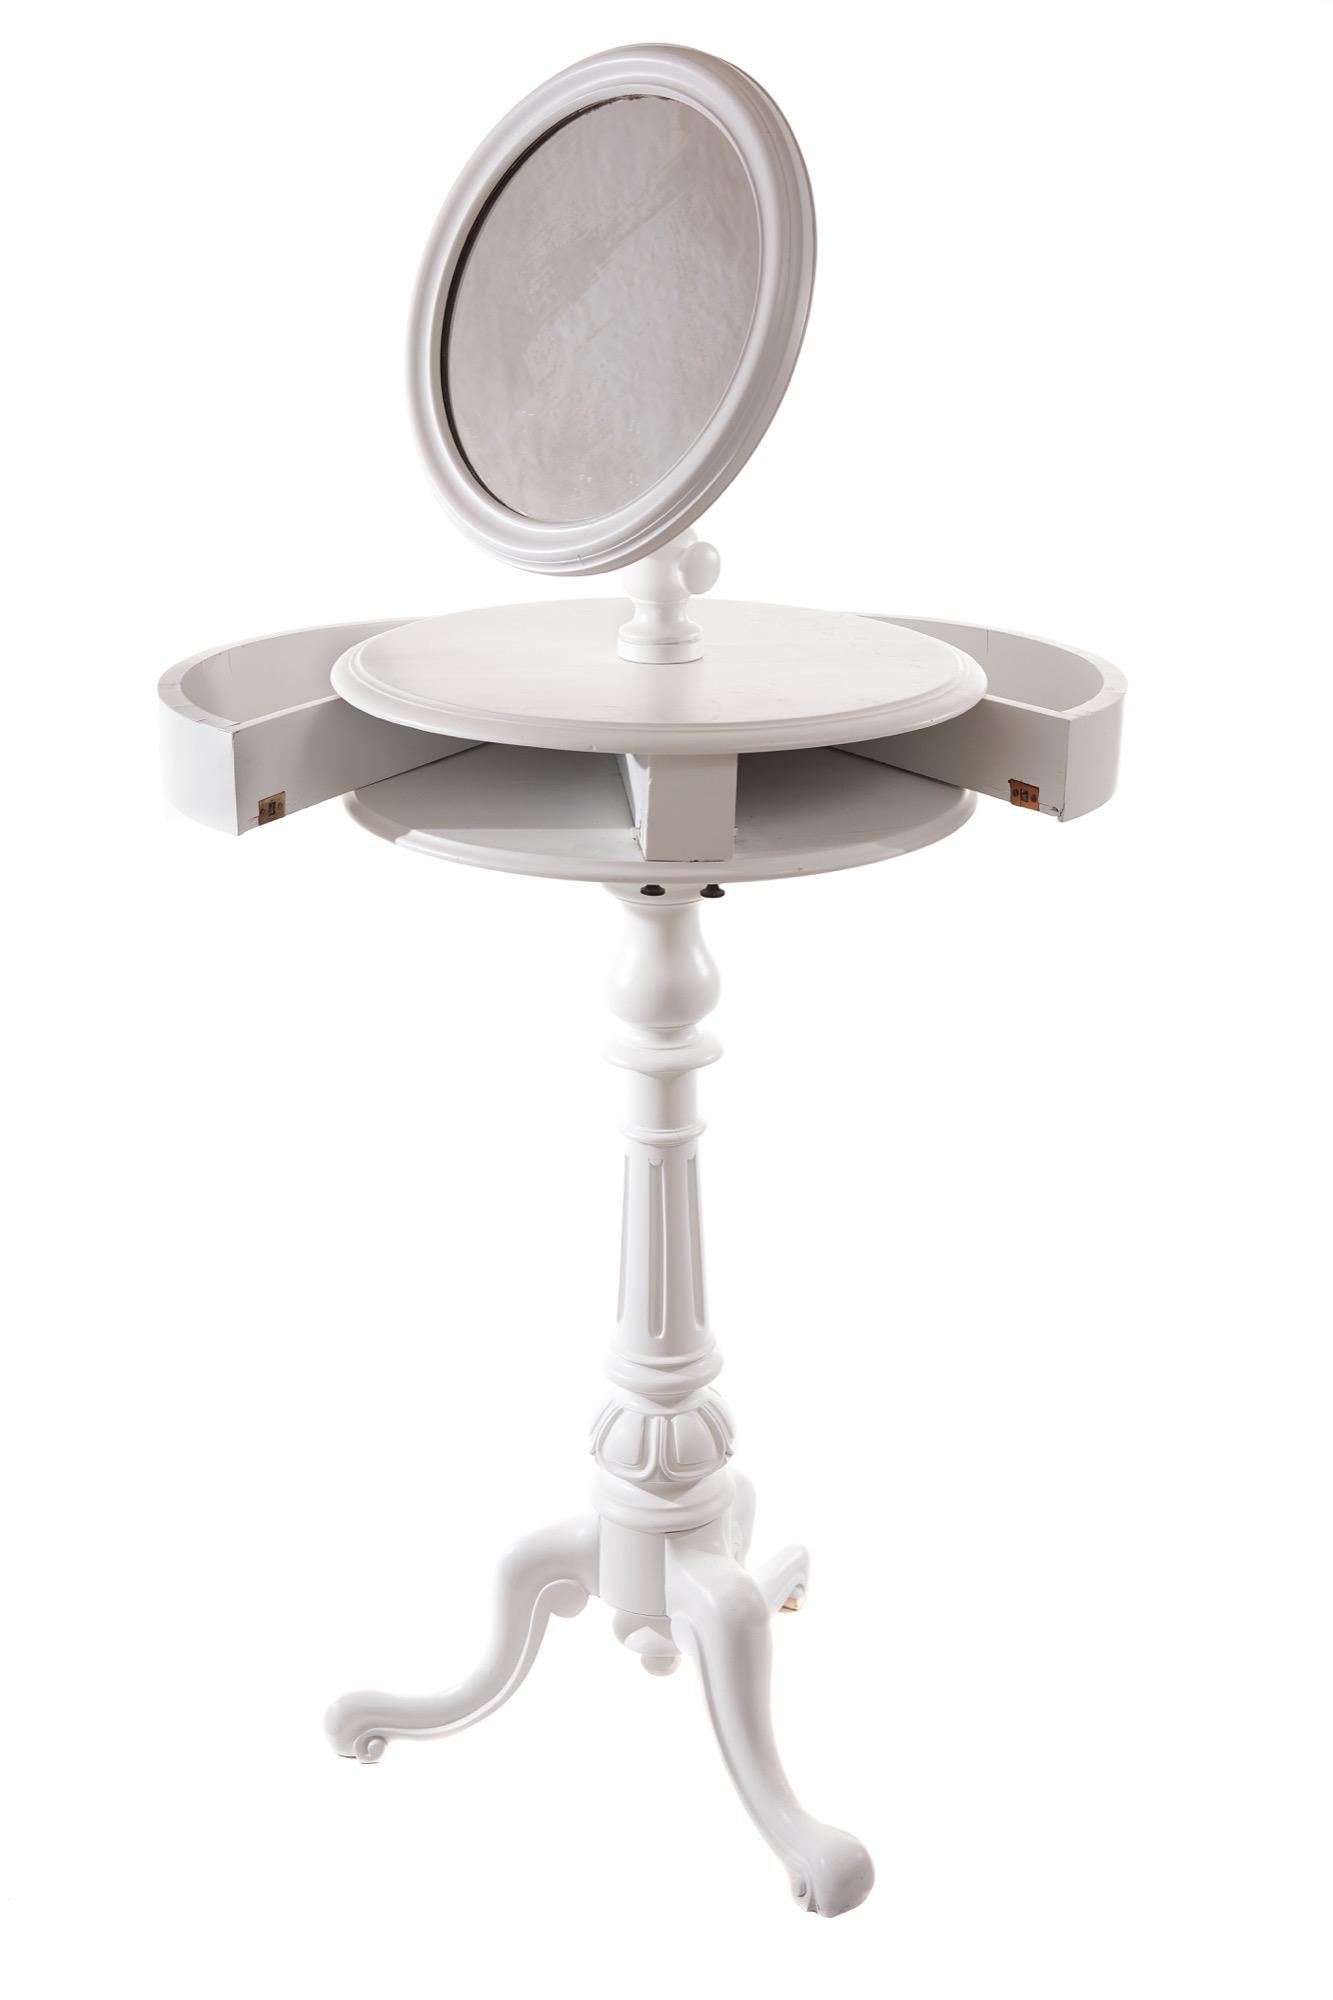 Victorian 19th century antique painted adjustable shaving mirror with a round adjustable mirror. It has two opening centre compartments and is supported by a turned reeded column. It stands on three shaped cabriole legs.

Perfect